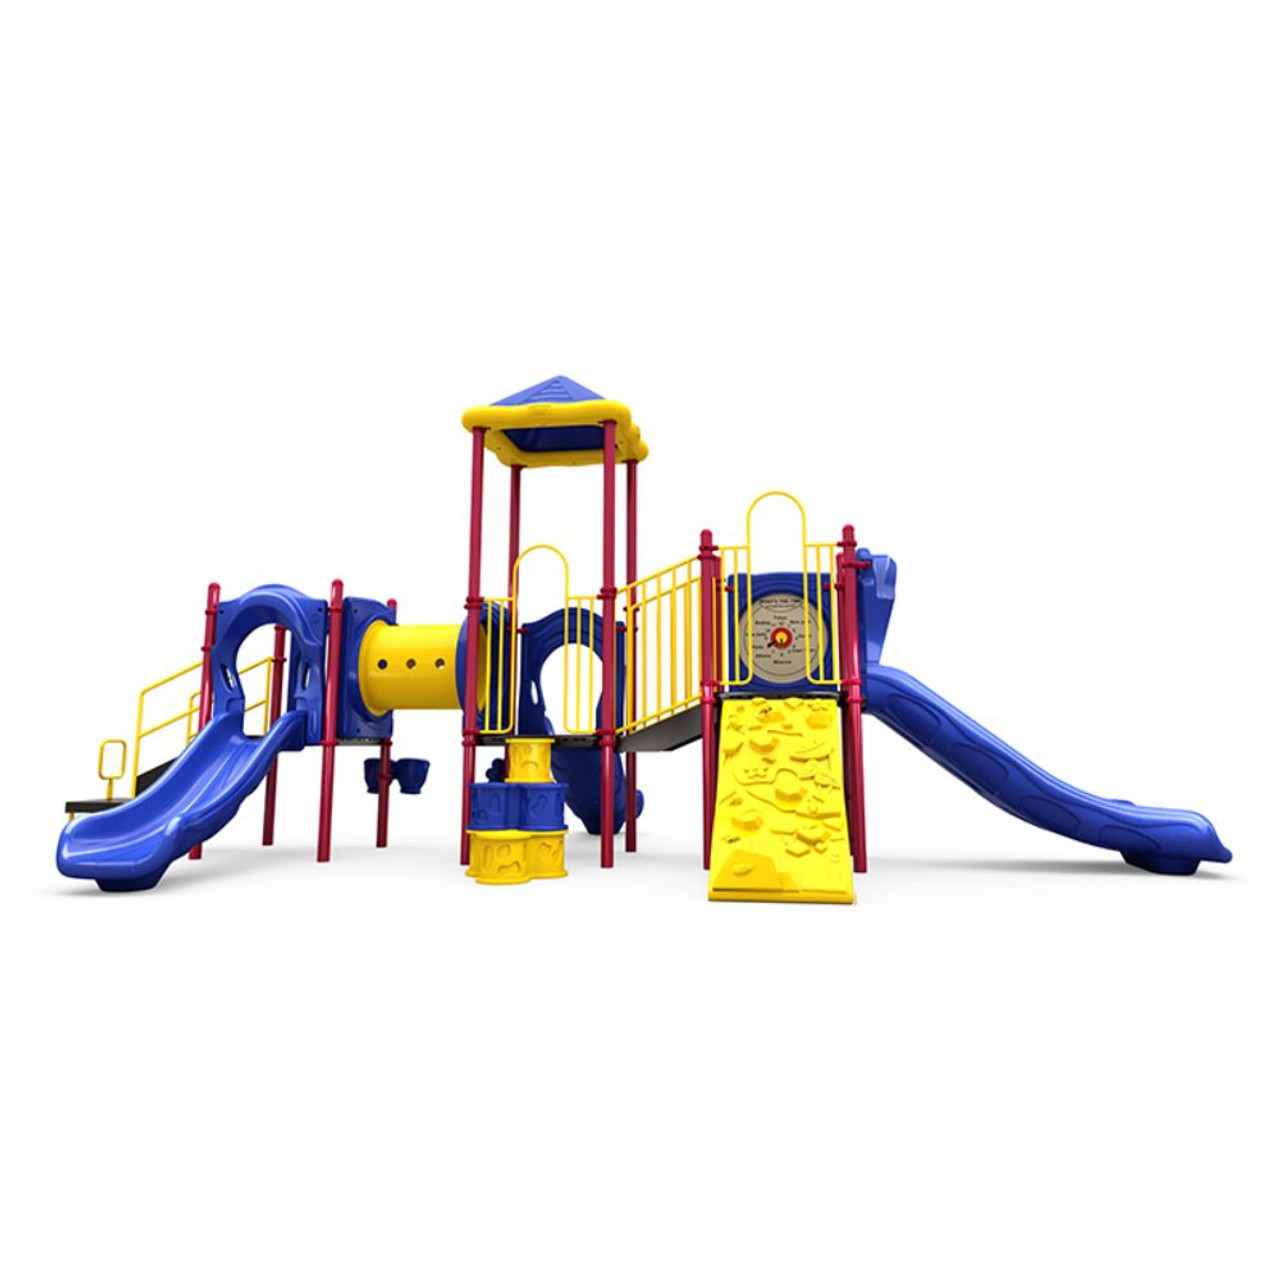 Play Time Playset - primary - pyramid roof option